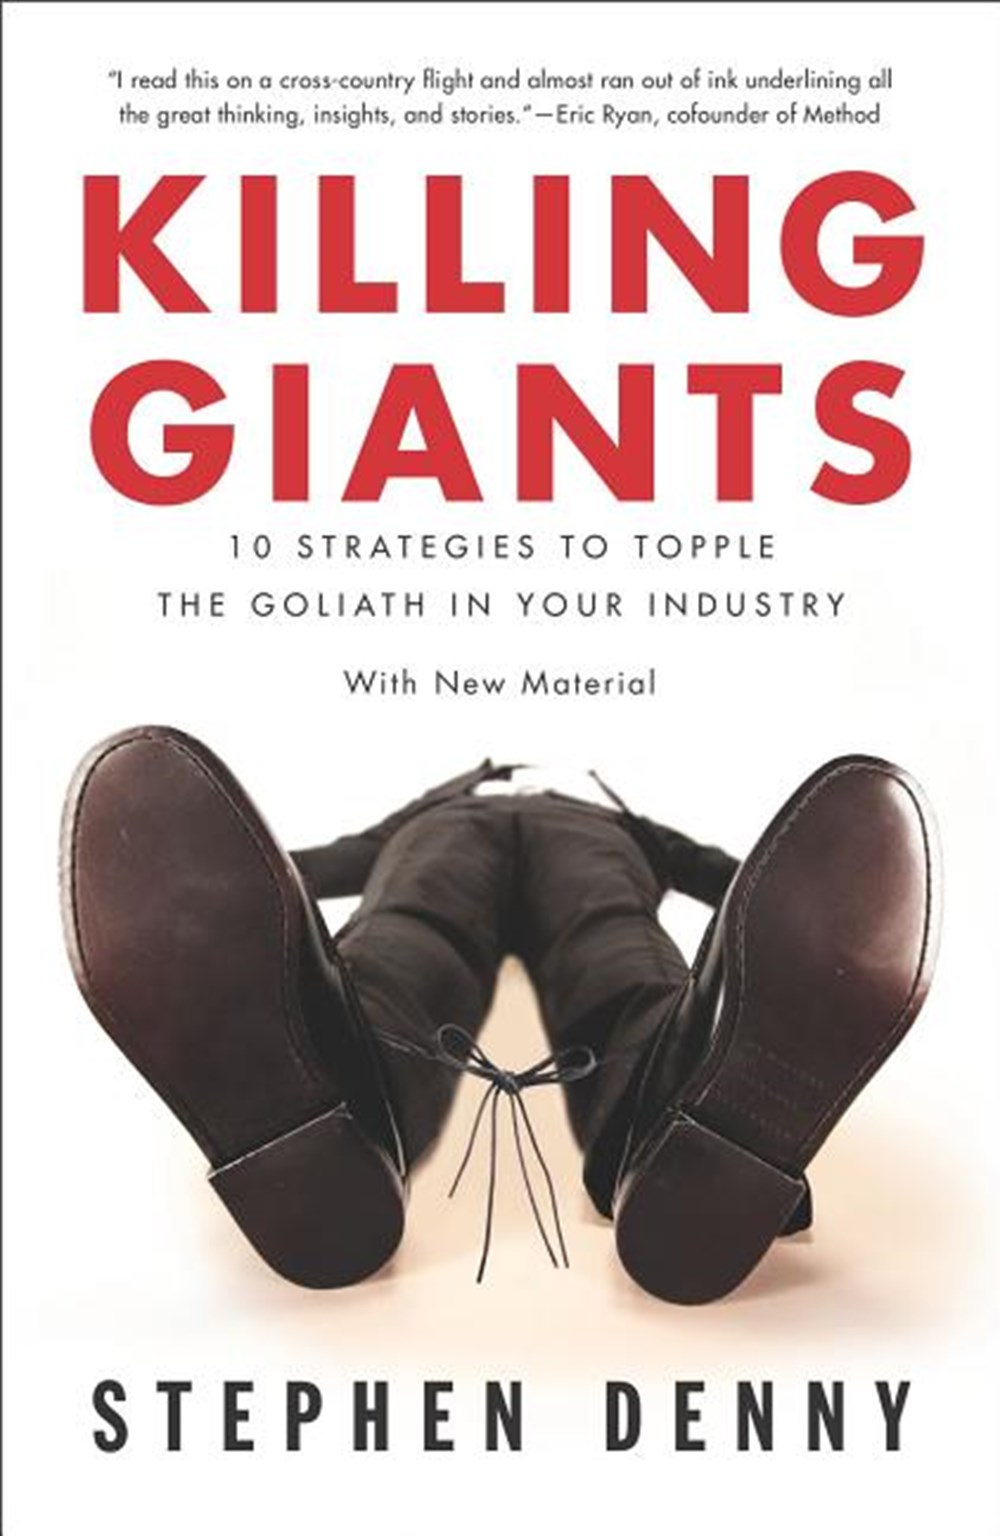 Killing Giants 10 Strategies to Topple the Goliath in Your Industry (Updated)